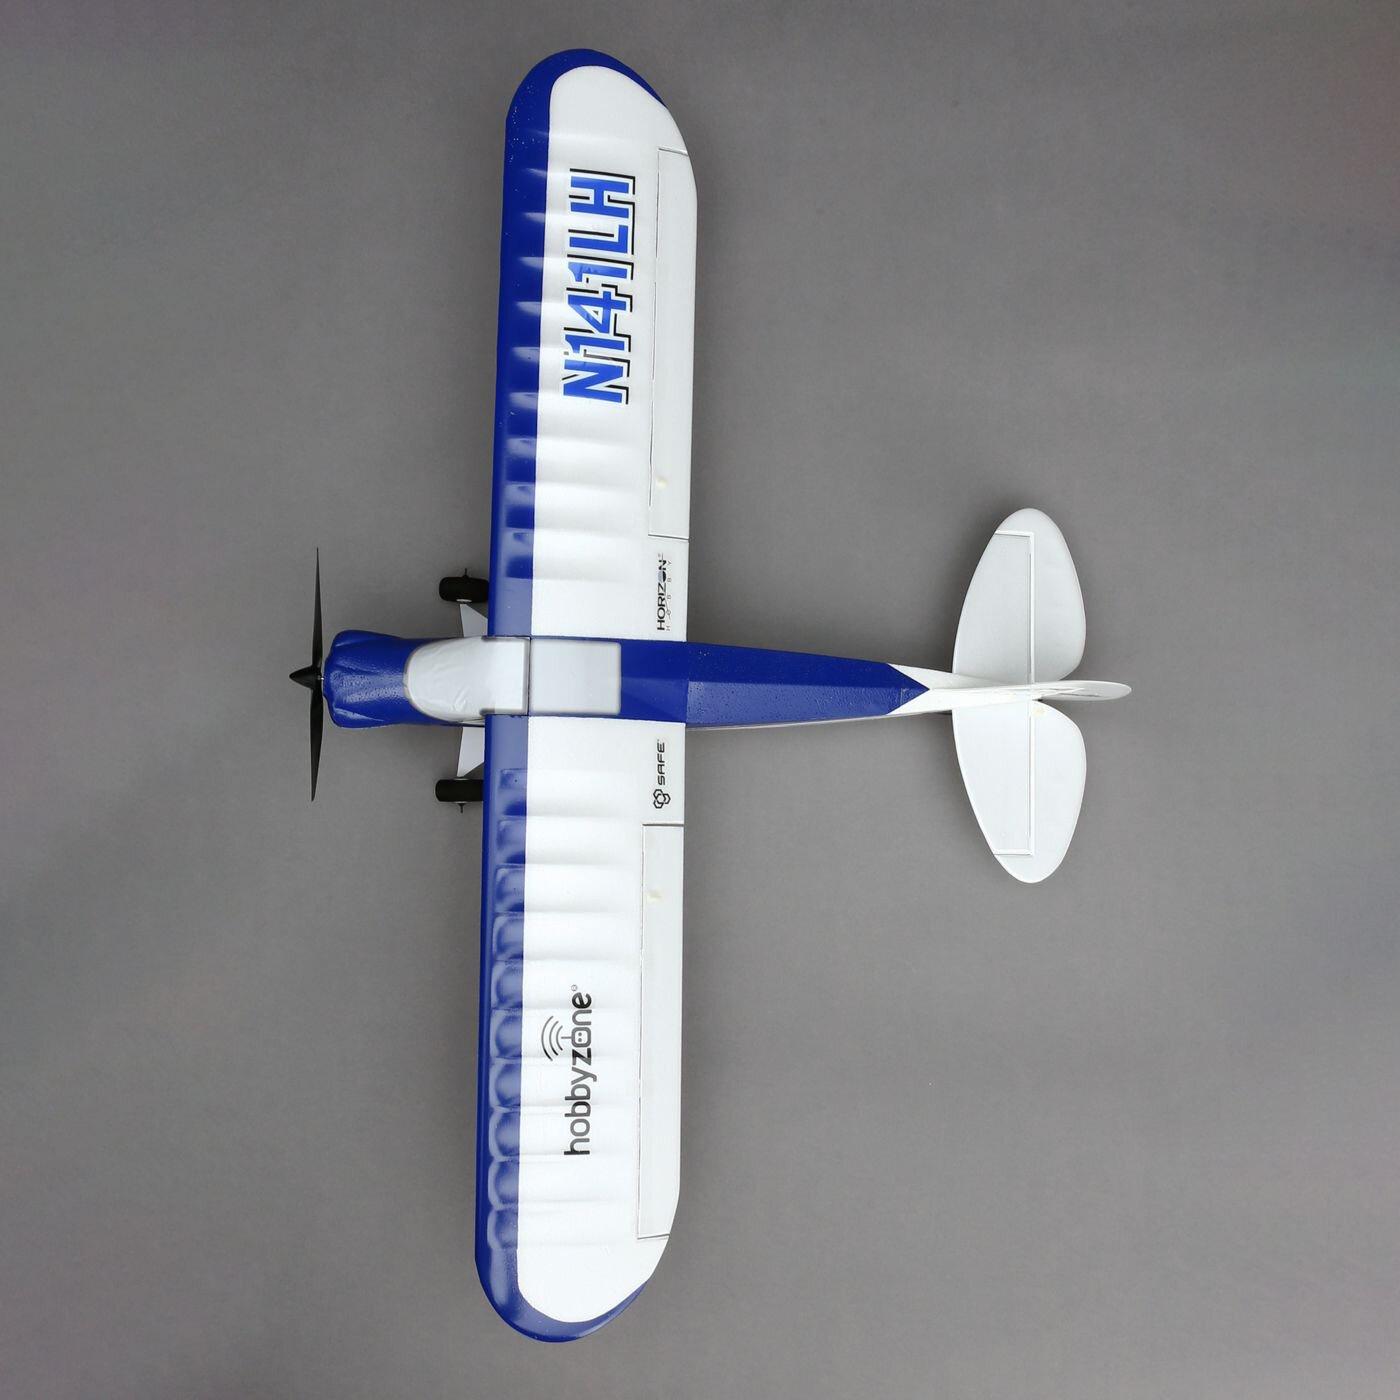 Hobbyzone Airplanes: Enhance Your Flying Experience with HobbyZone Accessories